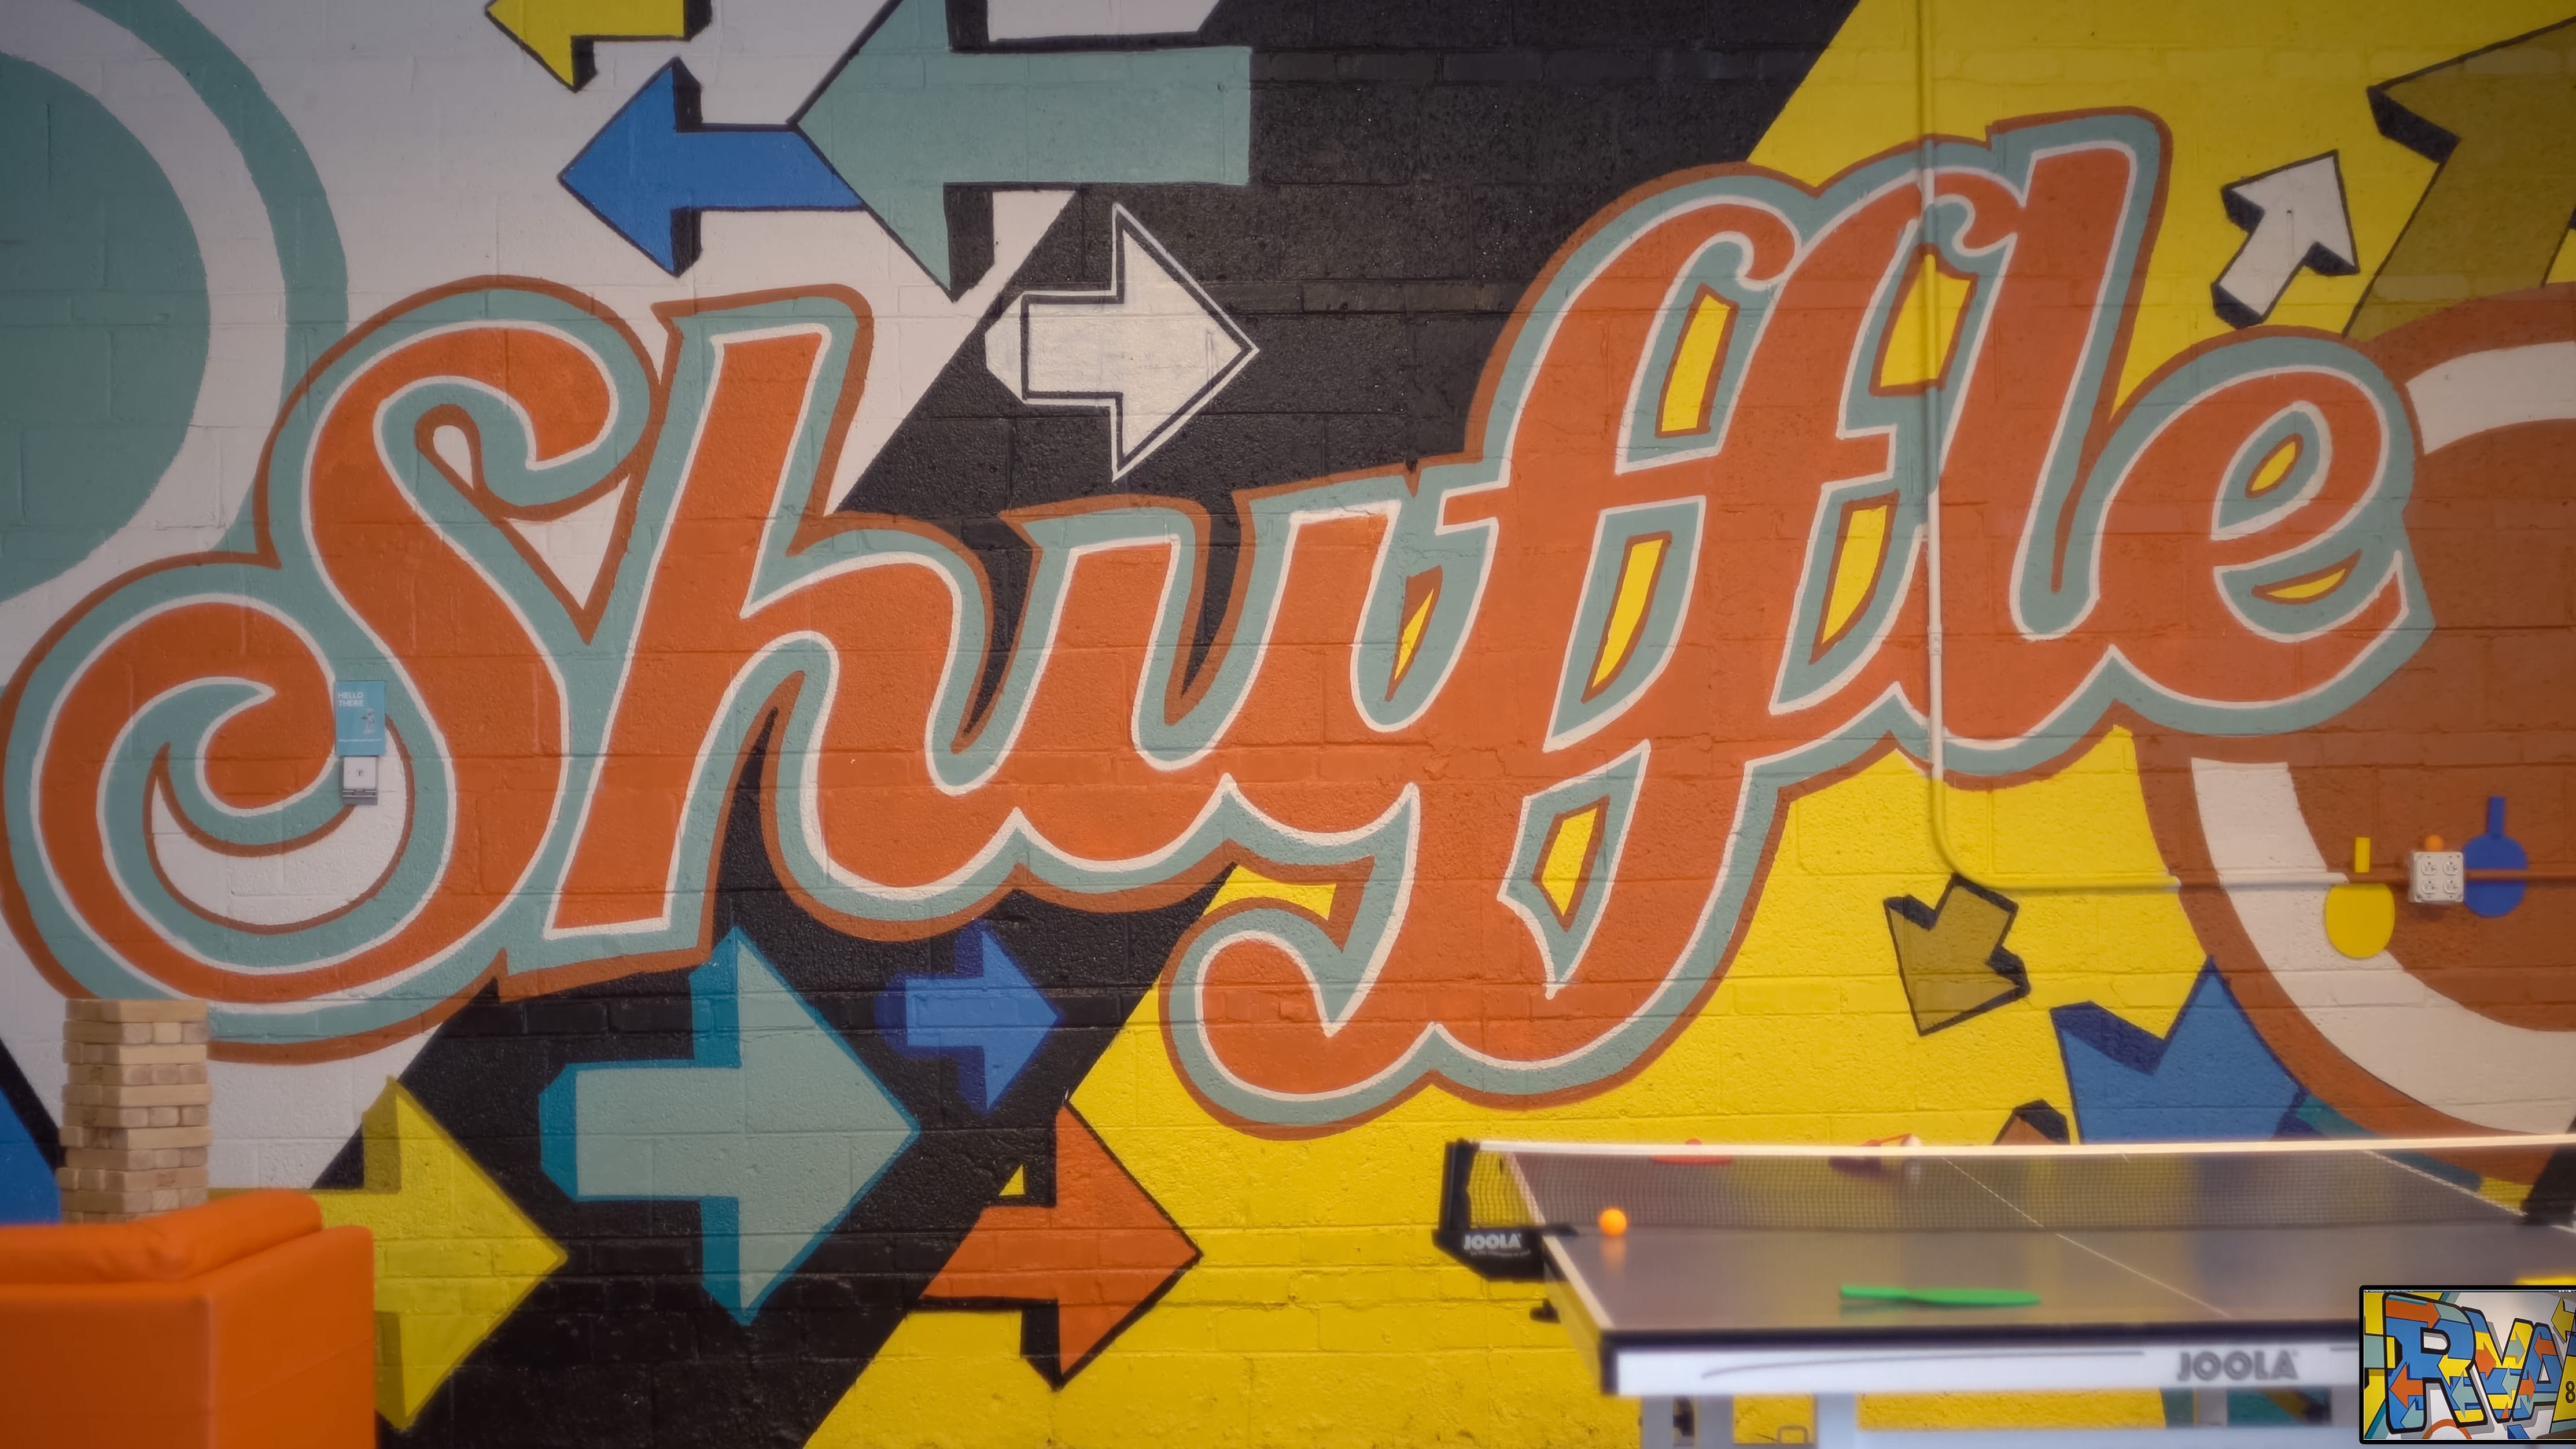 A wall mural that says "Shuffle" in a script font, surrounded by multicolored arrows.